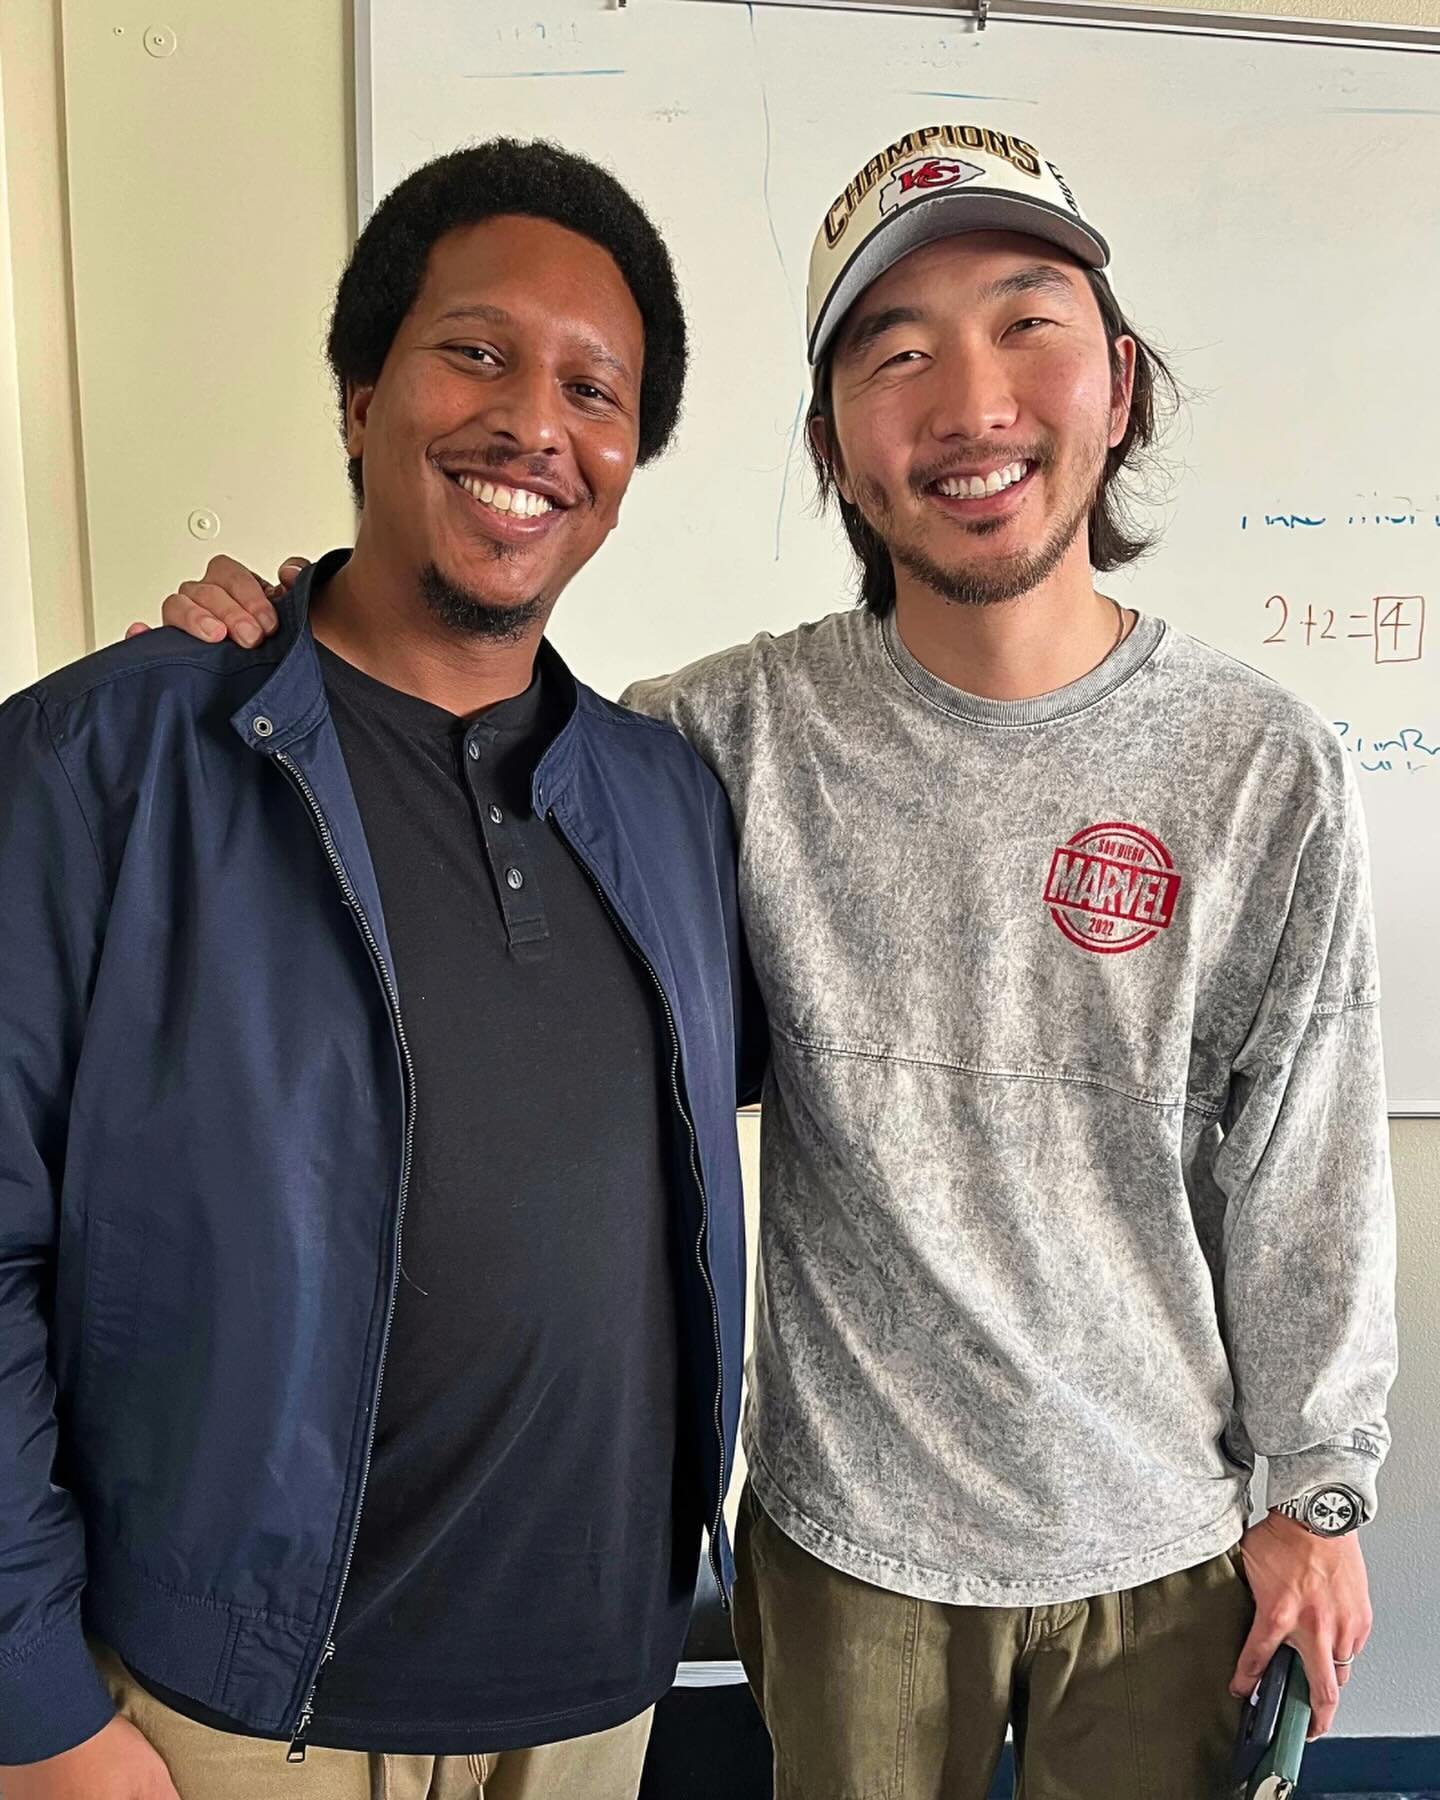 Grateful for @jasonylee_ Founder of @jubileemedia - for visiting Spirit Awakening&rsquo;s Rites of Peace Program at John Muir HS Pasadena 💛

Jason, your willingness to share your time, expertise, and personal journey has made a significant differenc